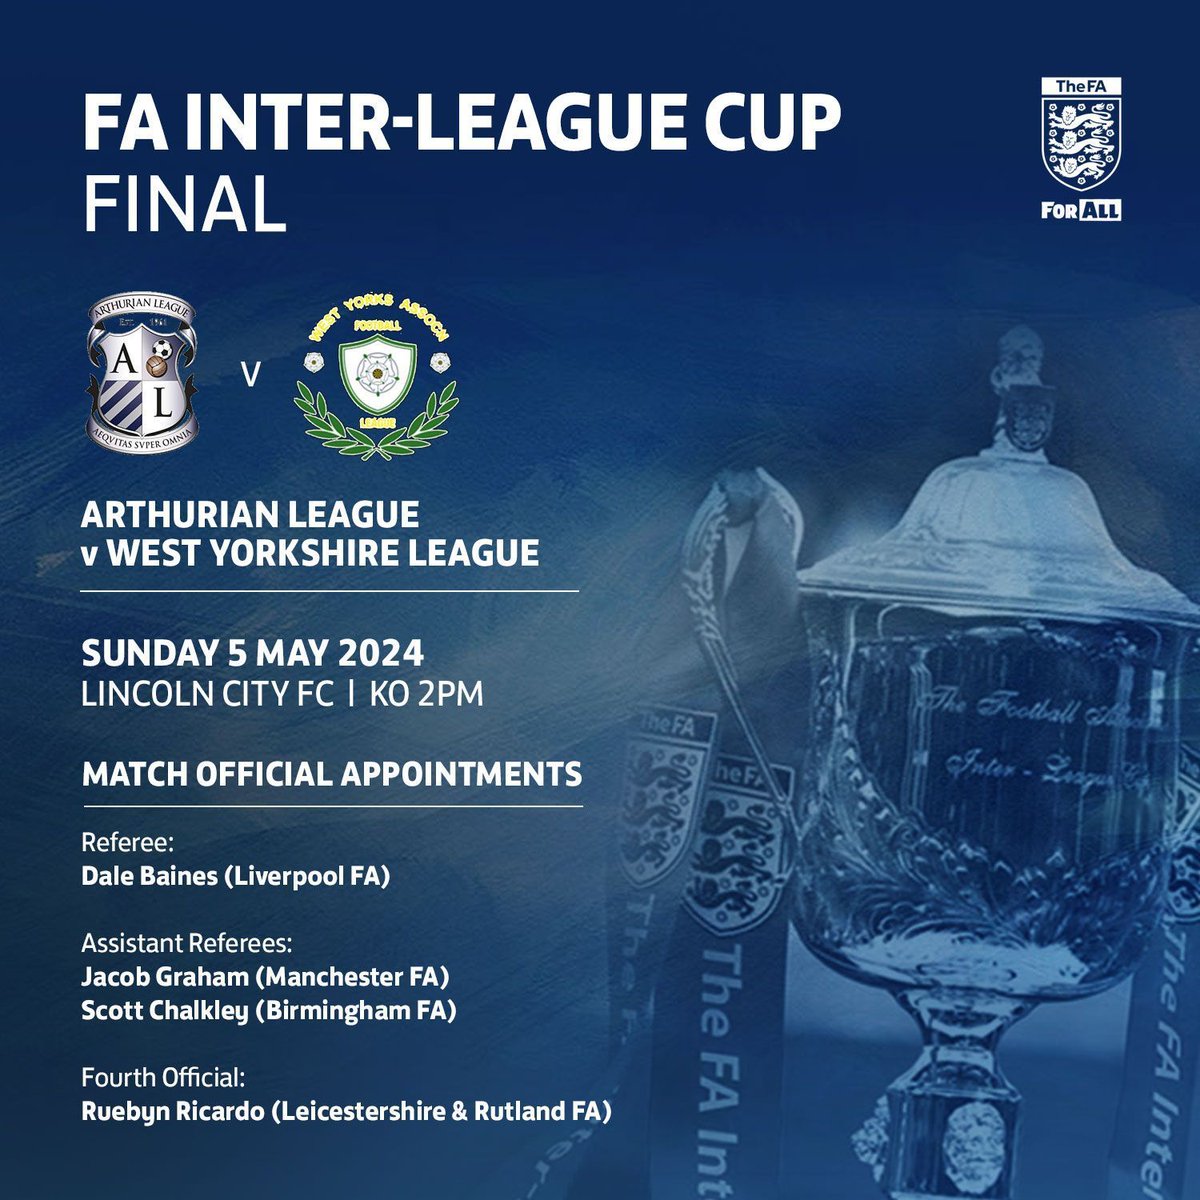 FA INTER-LEAGUE CUP 🏆 | Good luck to all the officials in this afternoon's FA Inter-League Cup game! 🤞⚽️